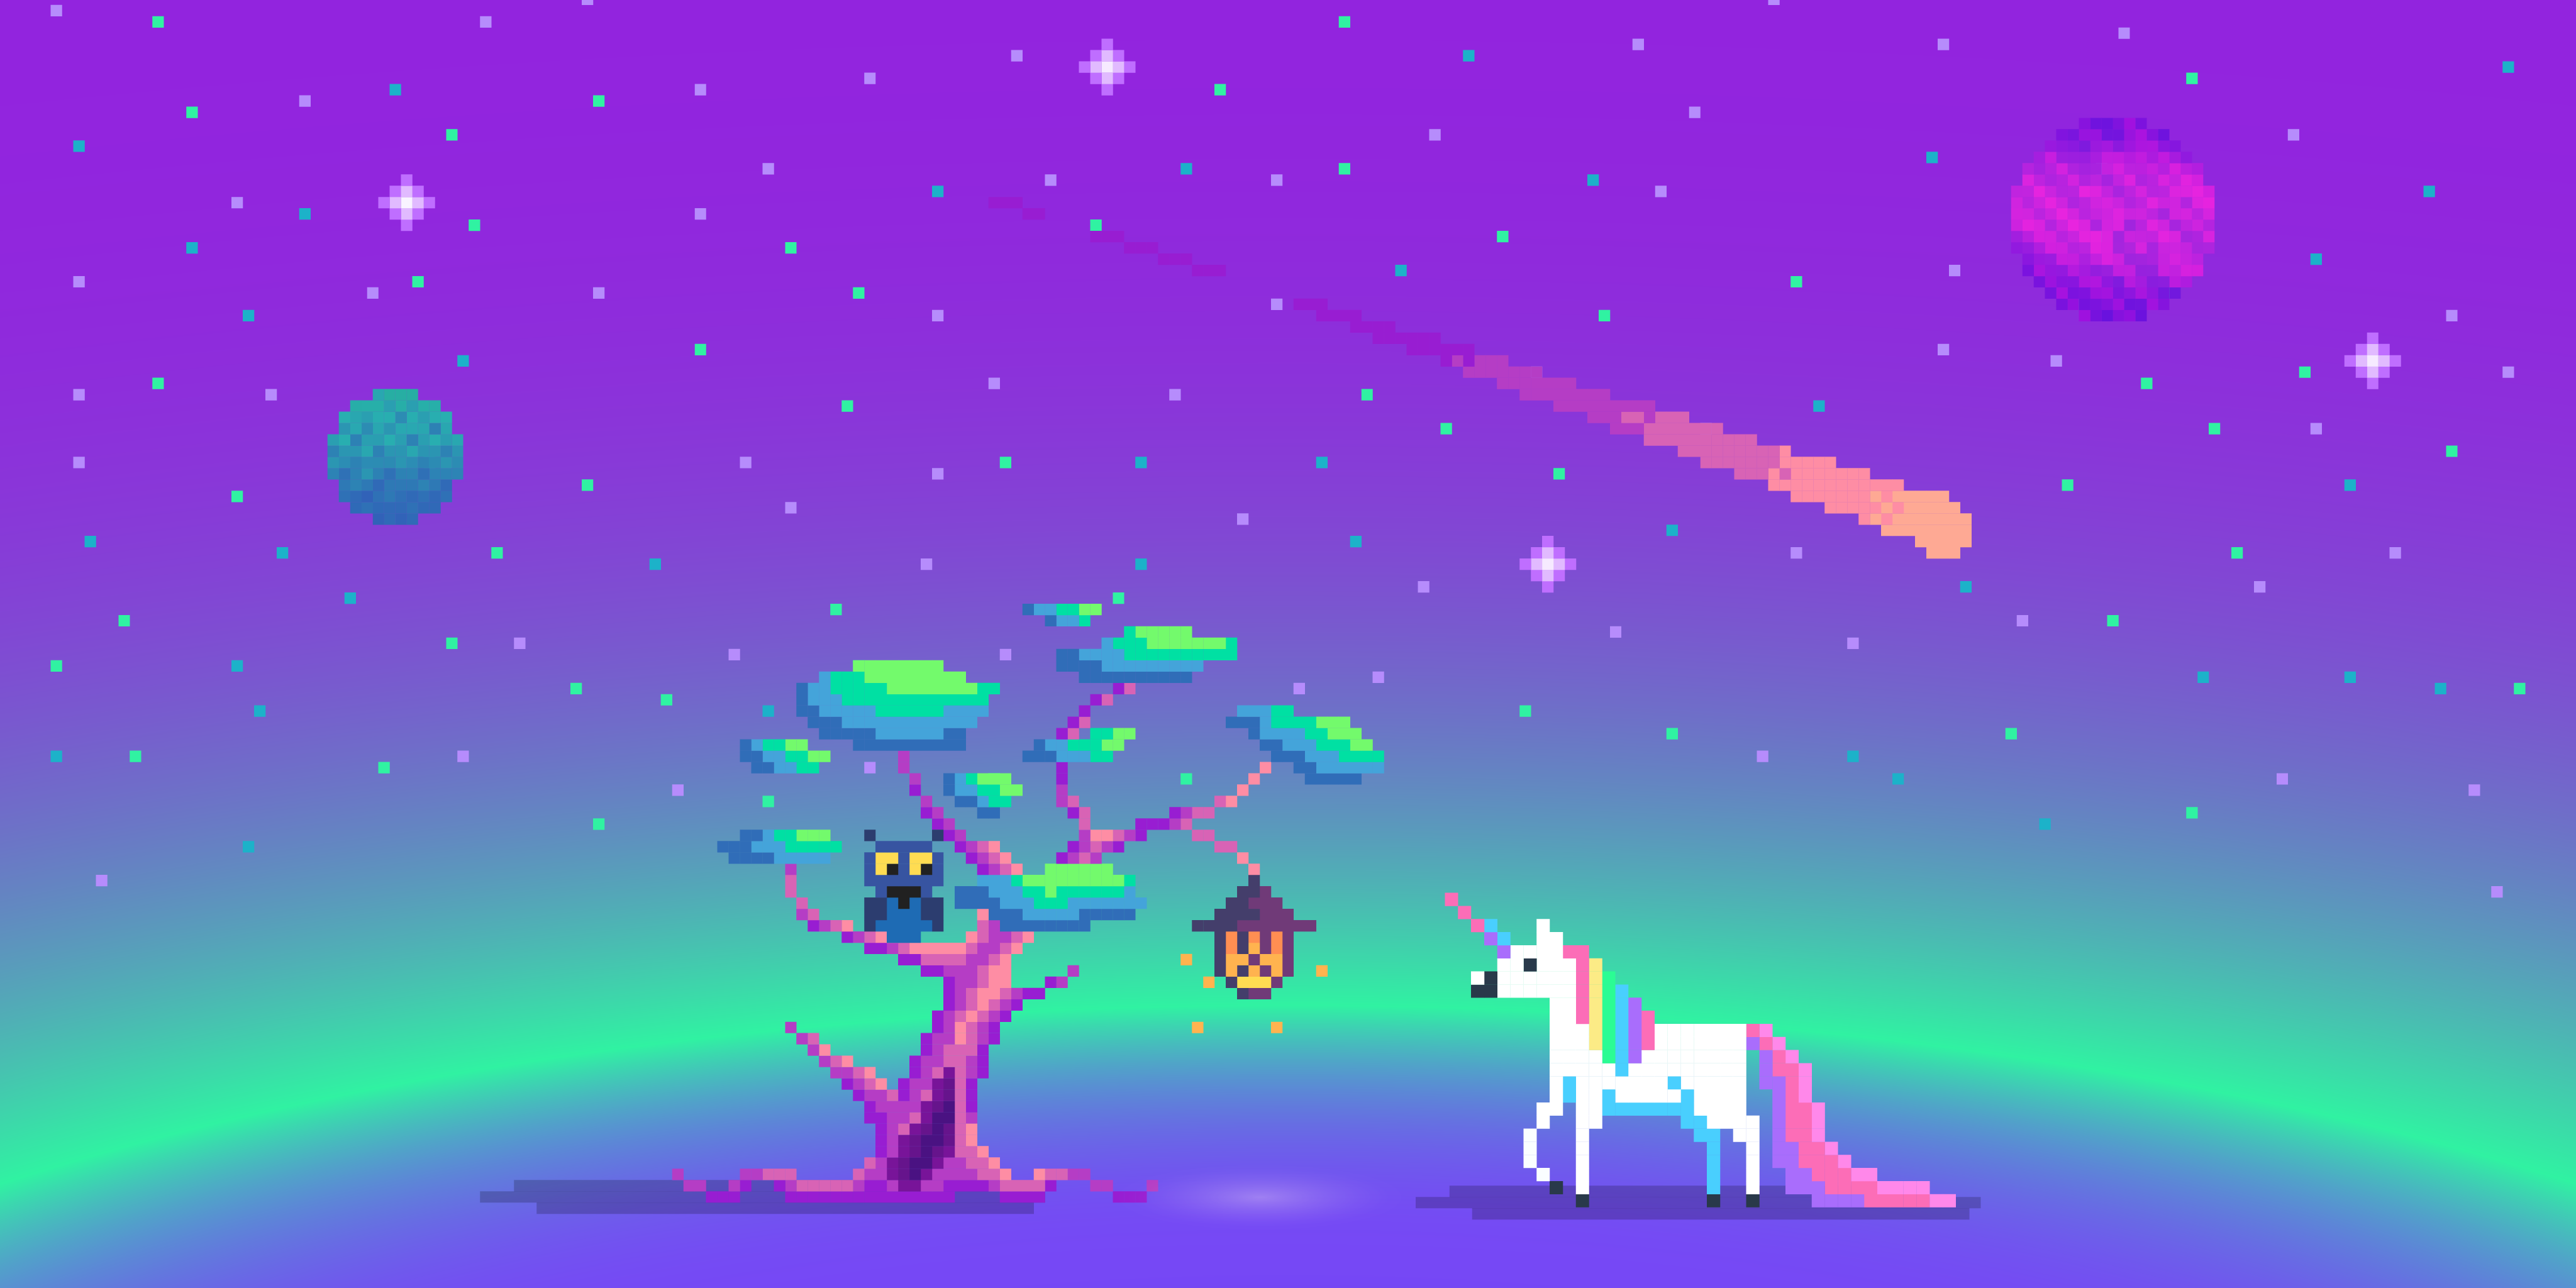 Pixel art of a unicorn next to a tree with an owl, under a galaxy with stars and a comet